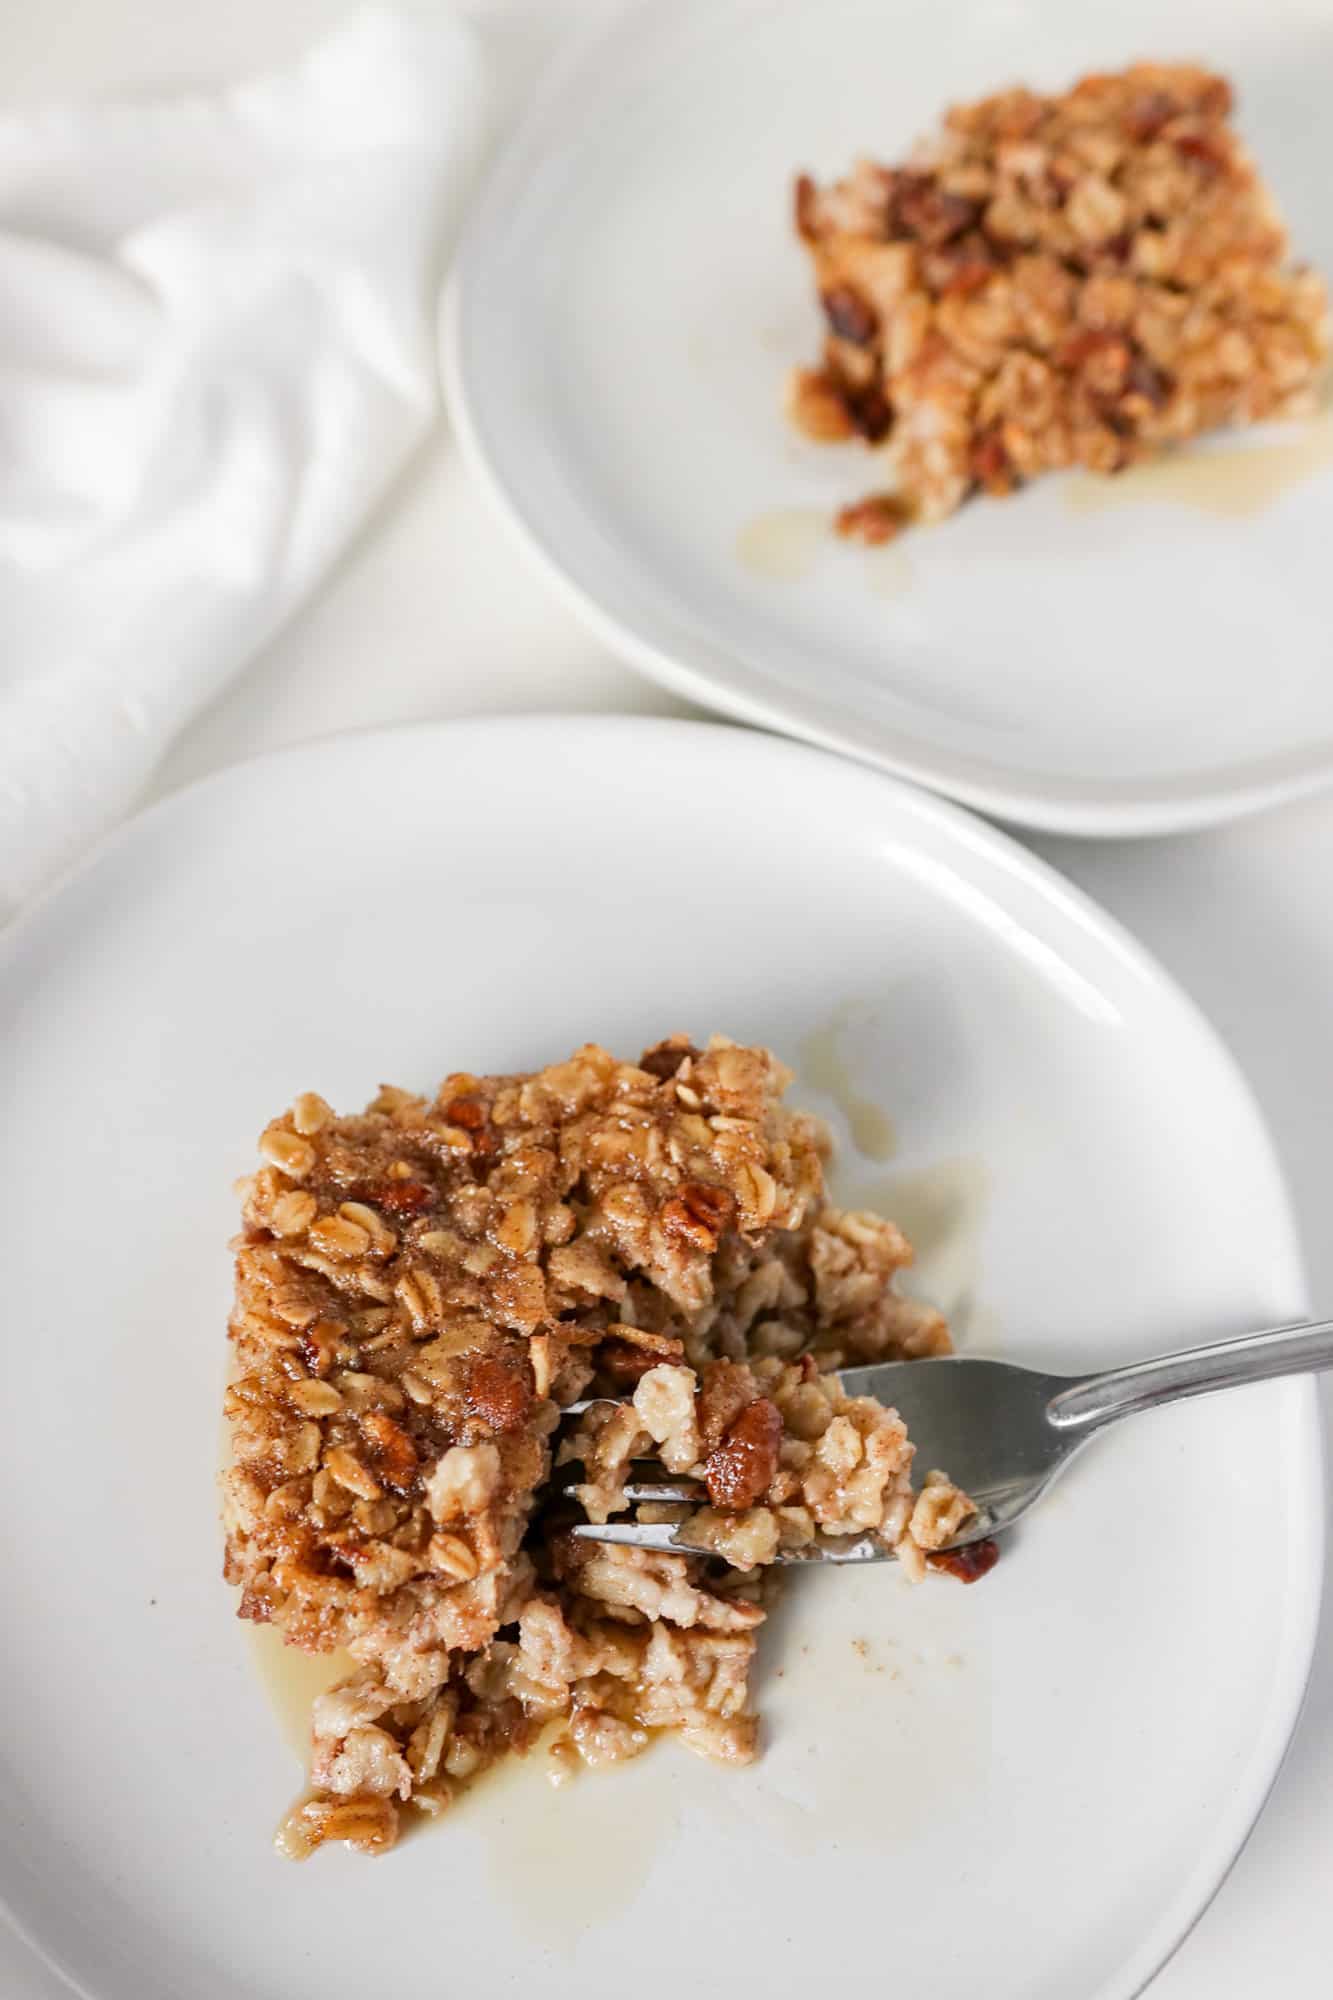 Baked Banana Oatmeal on a white plate with maple syrup